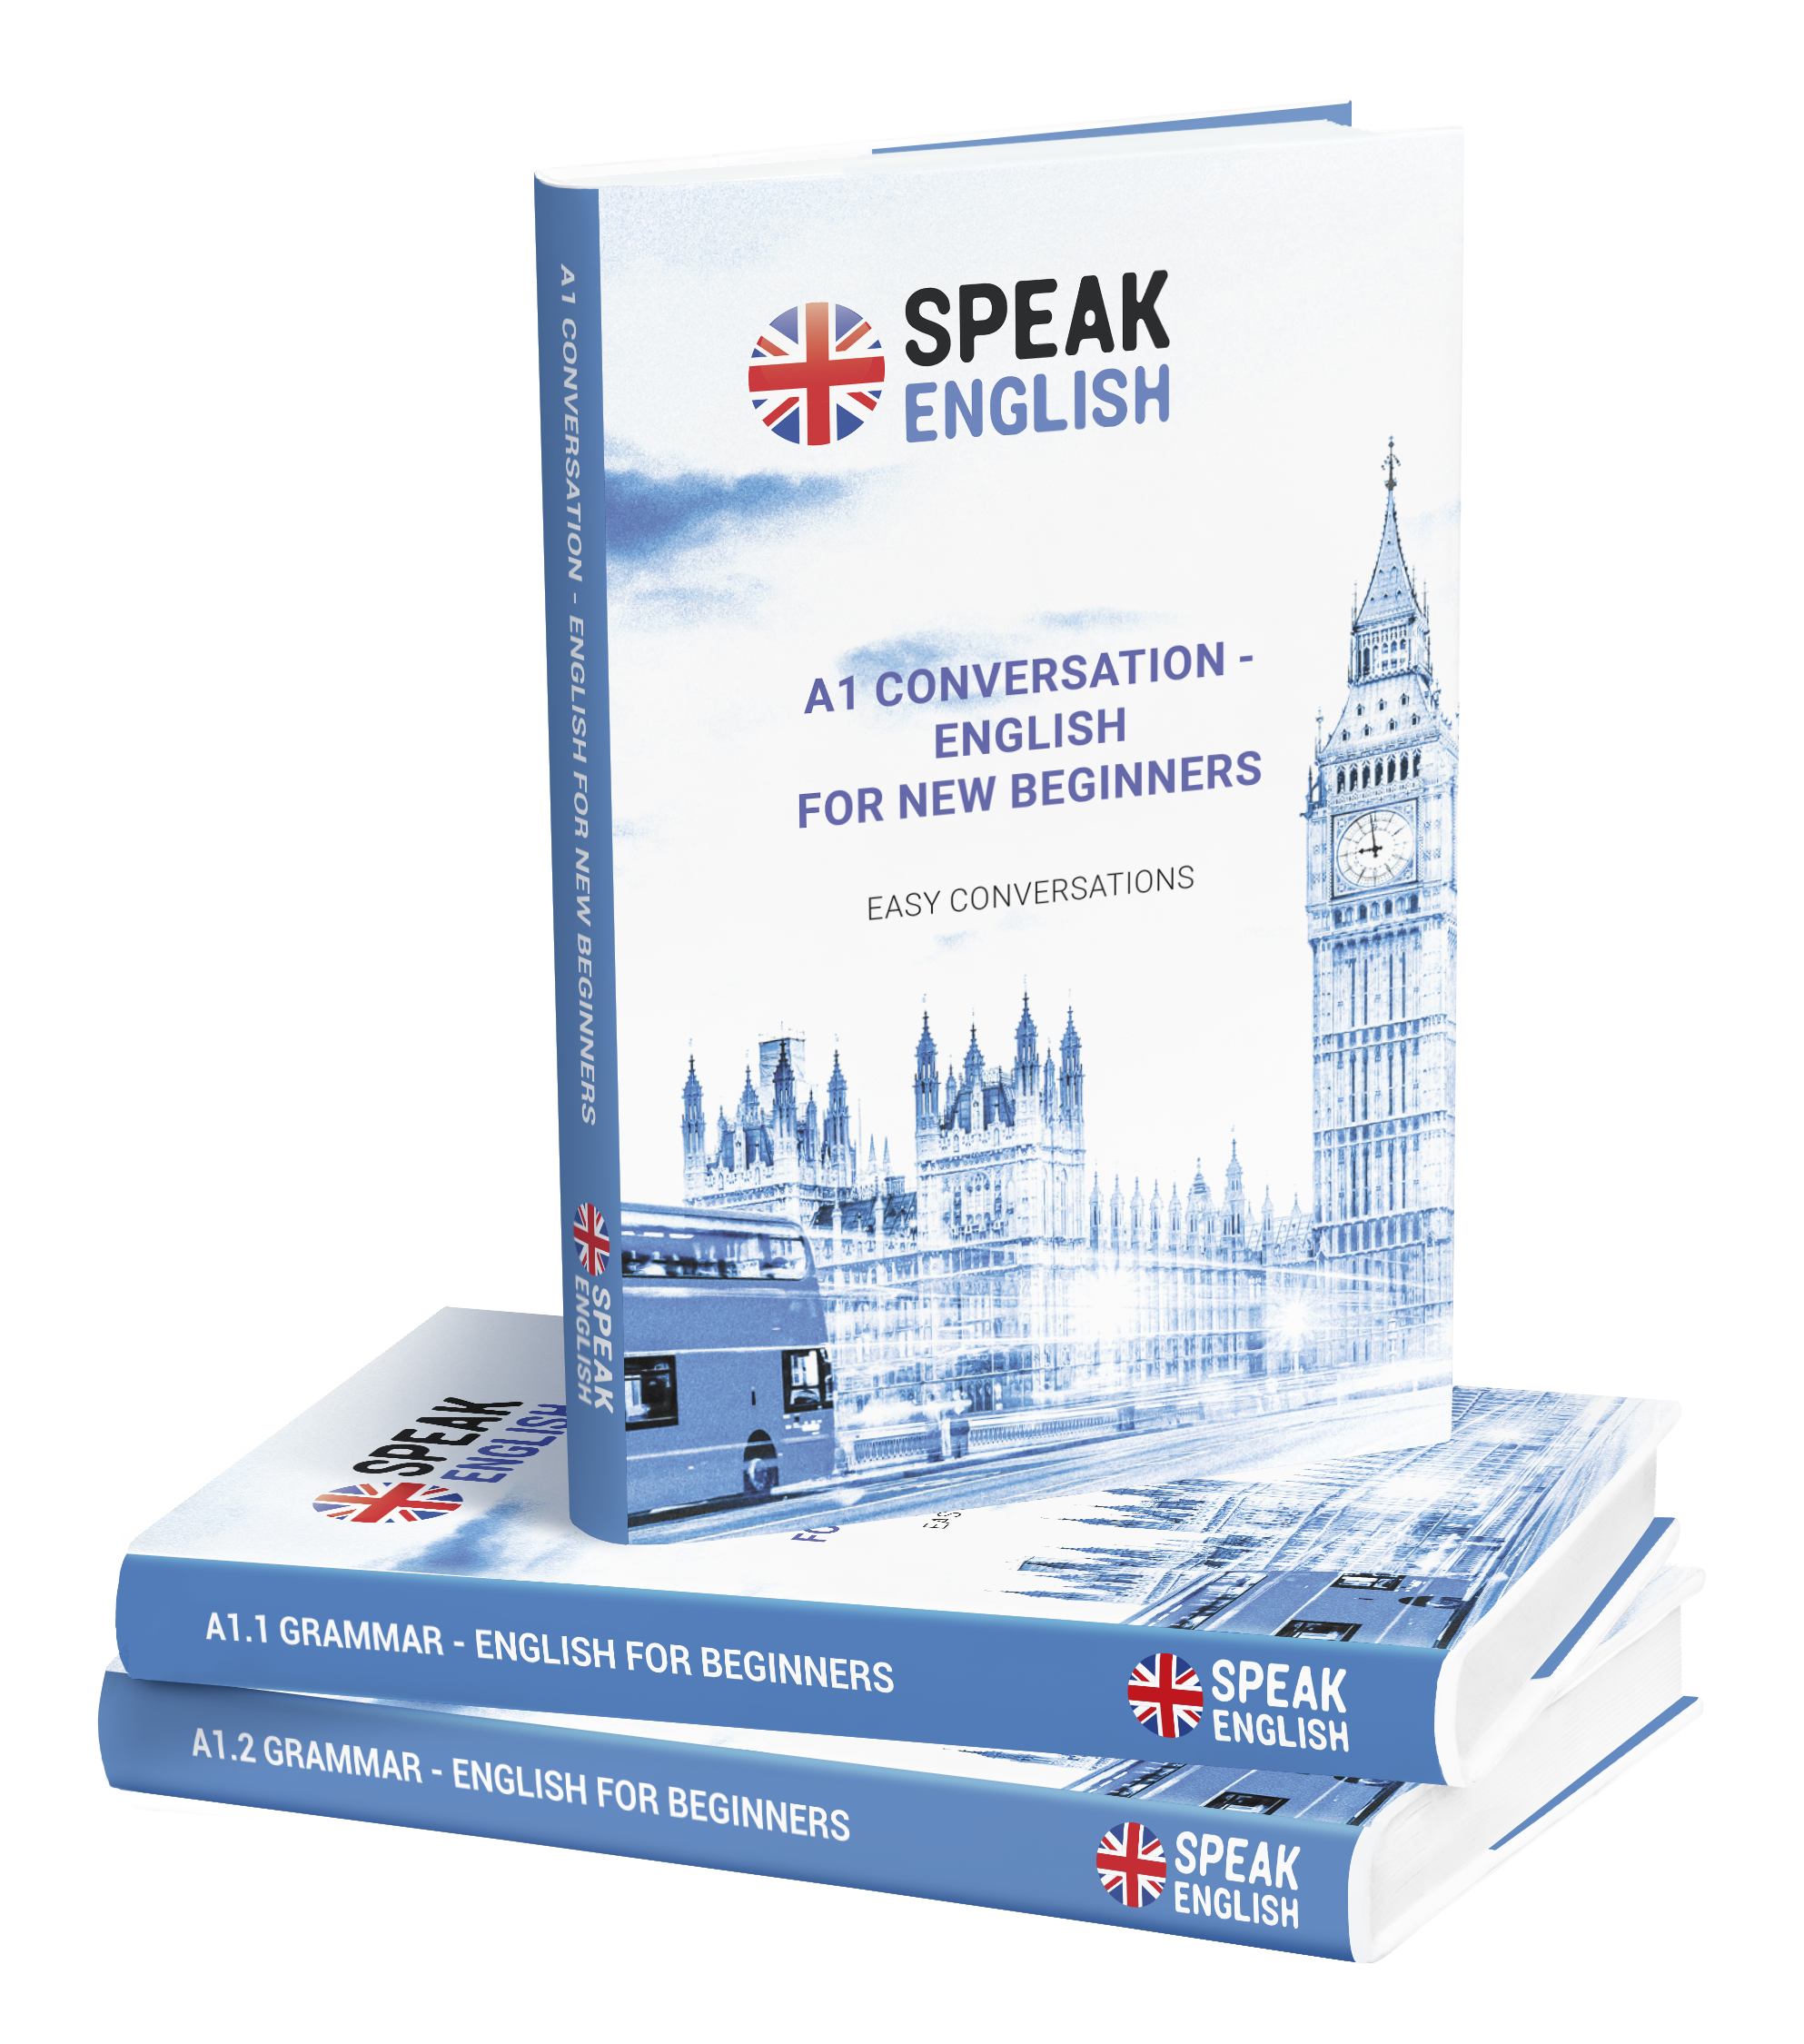 A1 level English books included in the price